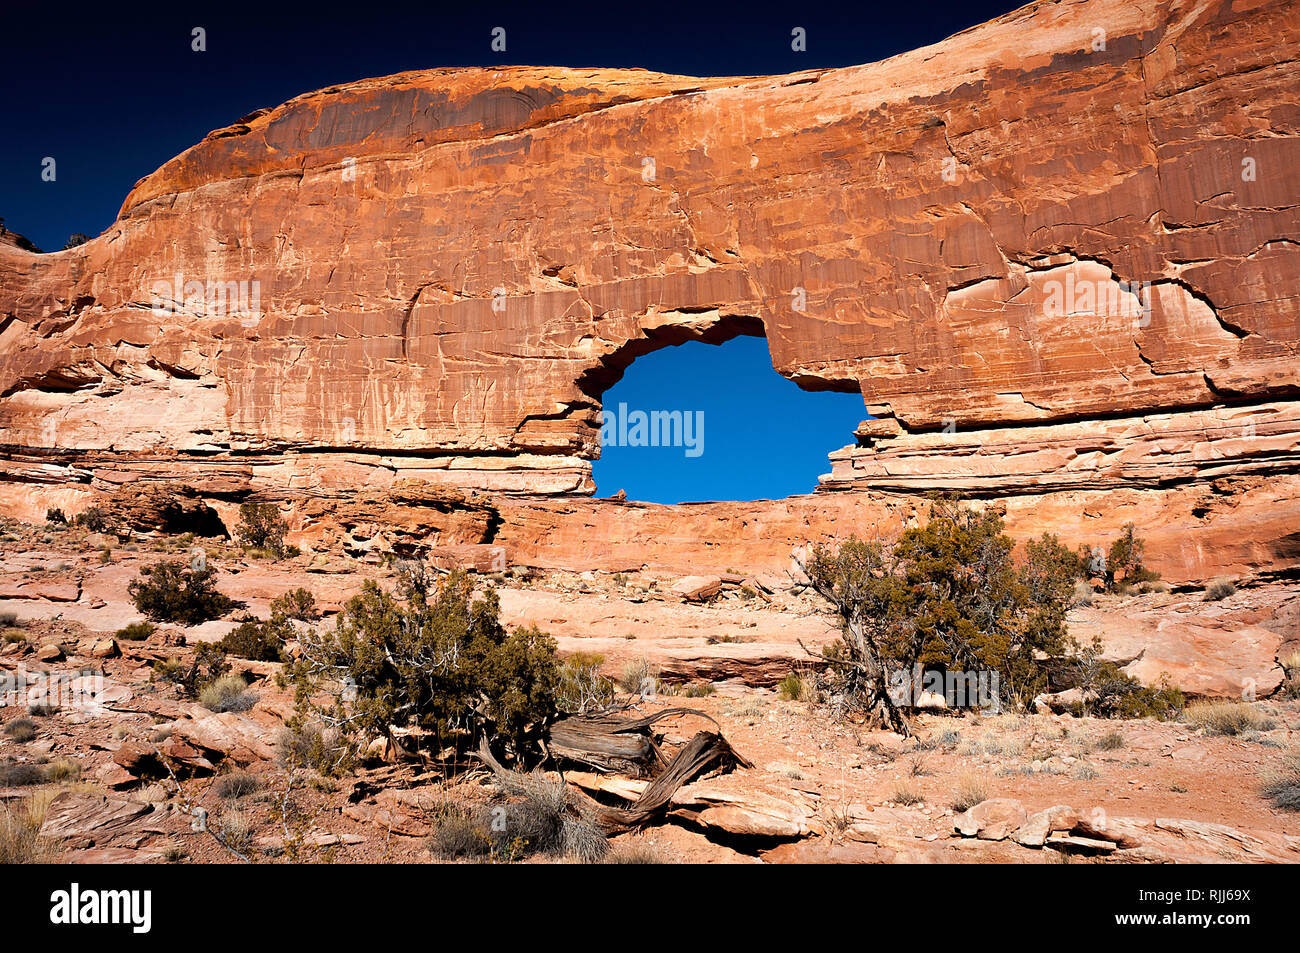 January 2019: Ancient canyon walls and deep winter blue skies frame the spectacular Gold Bar Arch, also known as Jeep Arch, near Canyonlands NP. Stock Photo